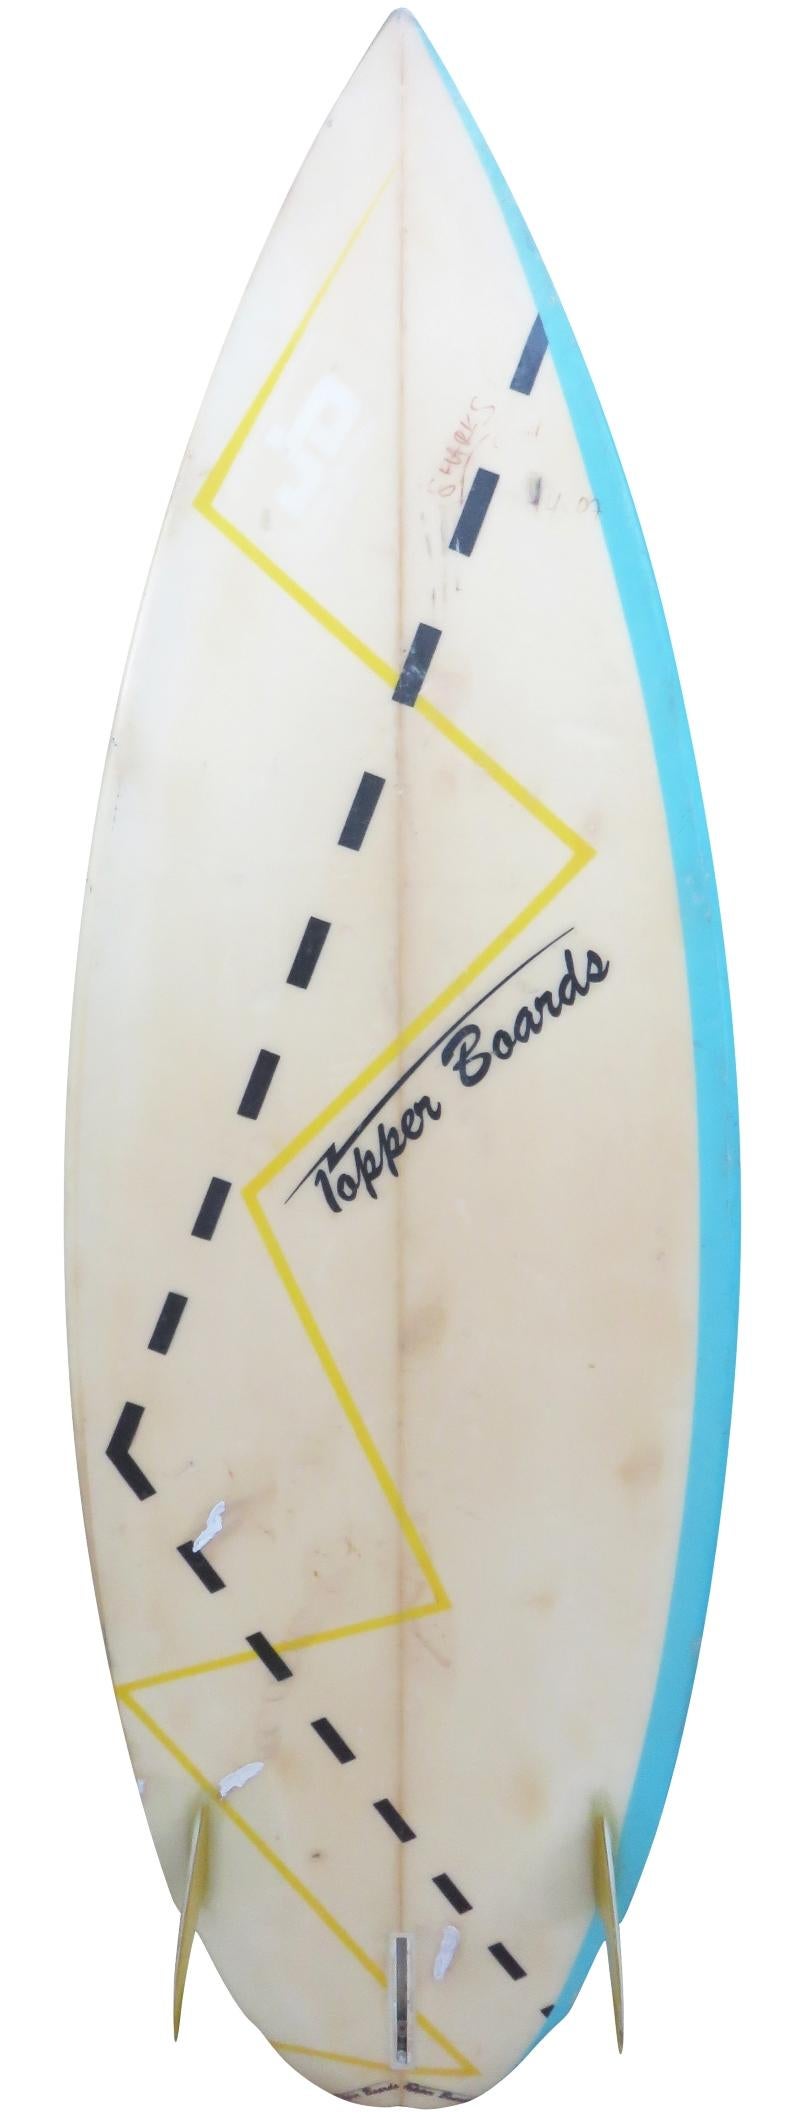 Vintage 1980s Sonshine surfboards topper shortboard. Features a double-line design with a unique single blue rail complete with 2+1 fin setup. An affordable example of a 1980s vintage shortboard.